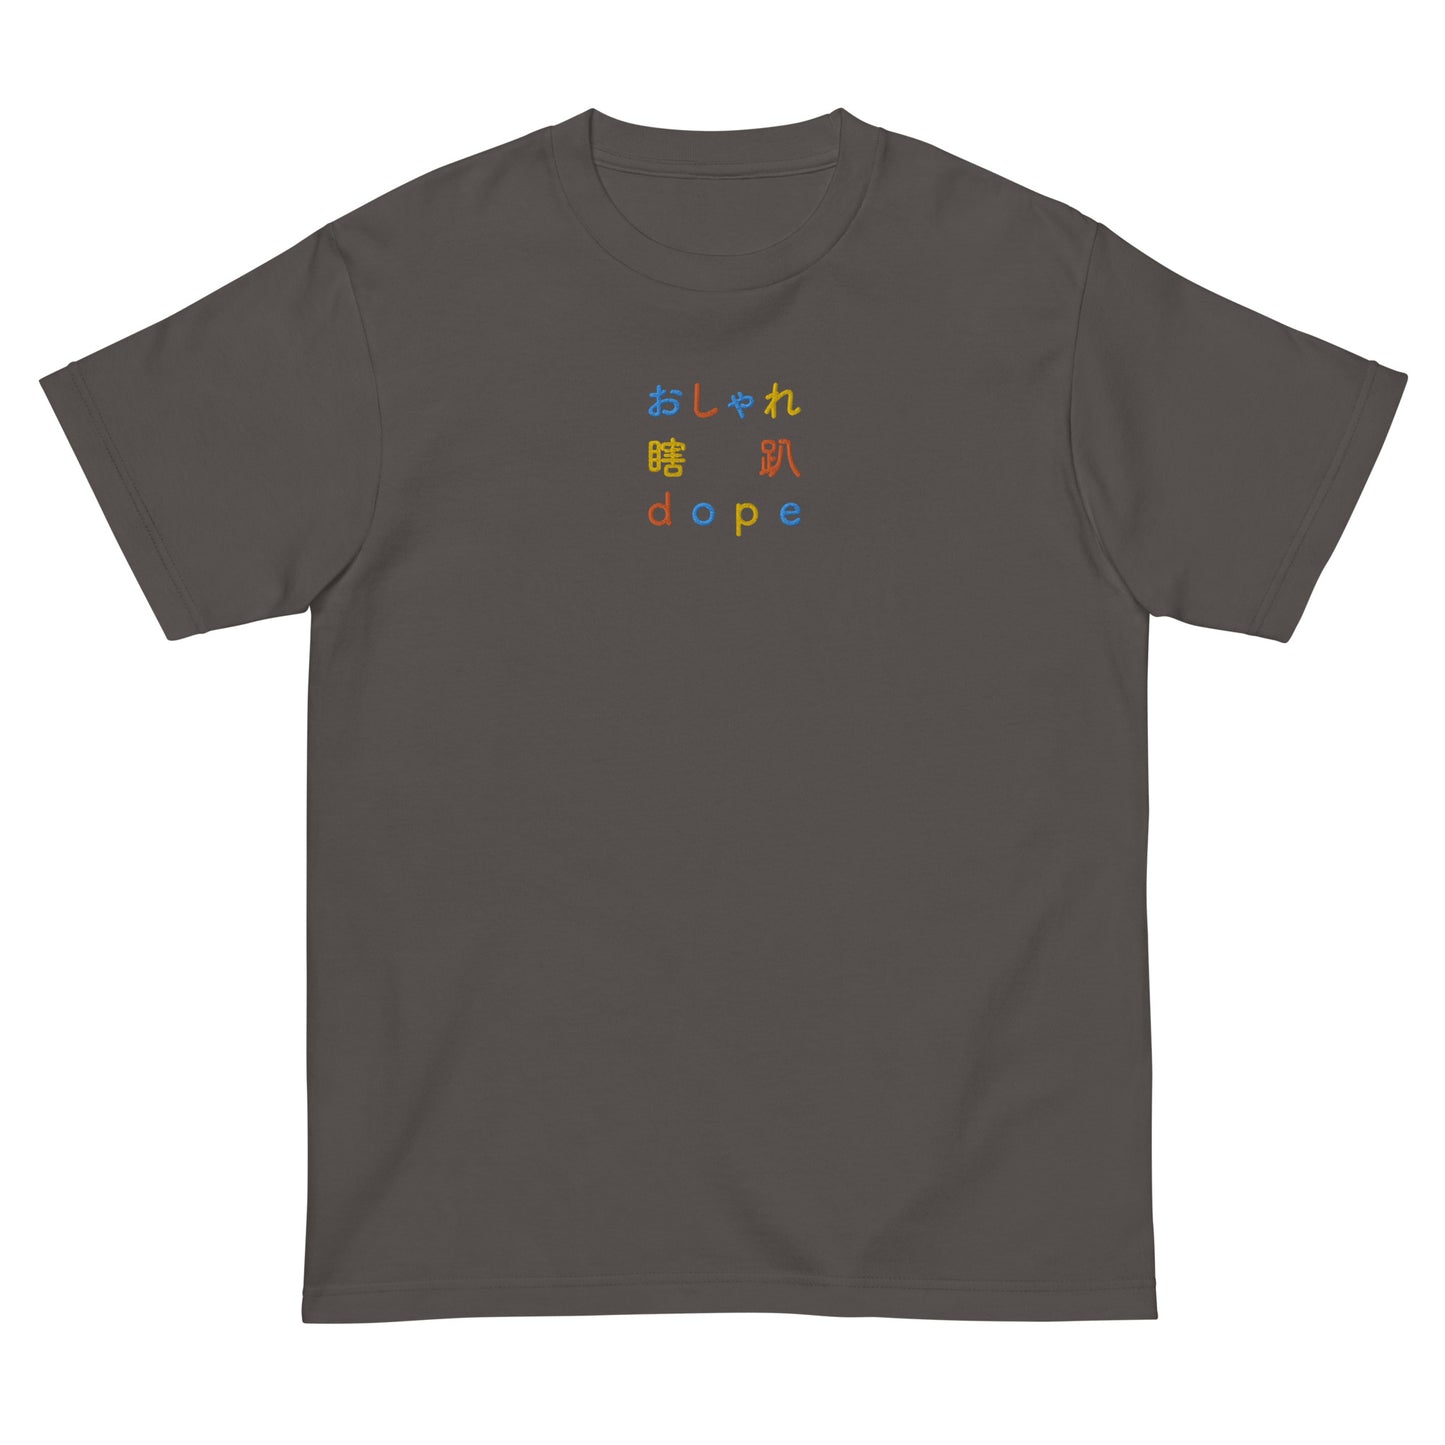 Dark Gray High Quality Tee - Front Design with an Blue, Orange, Yellow Embroidery "Dope" in Japanese,Chinese and English